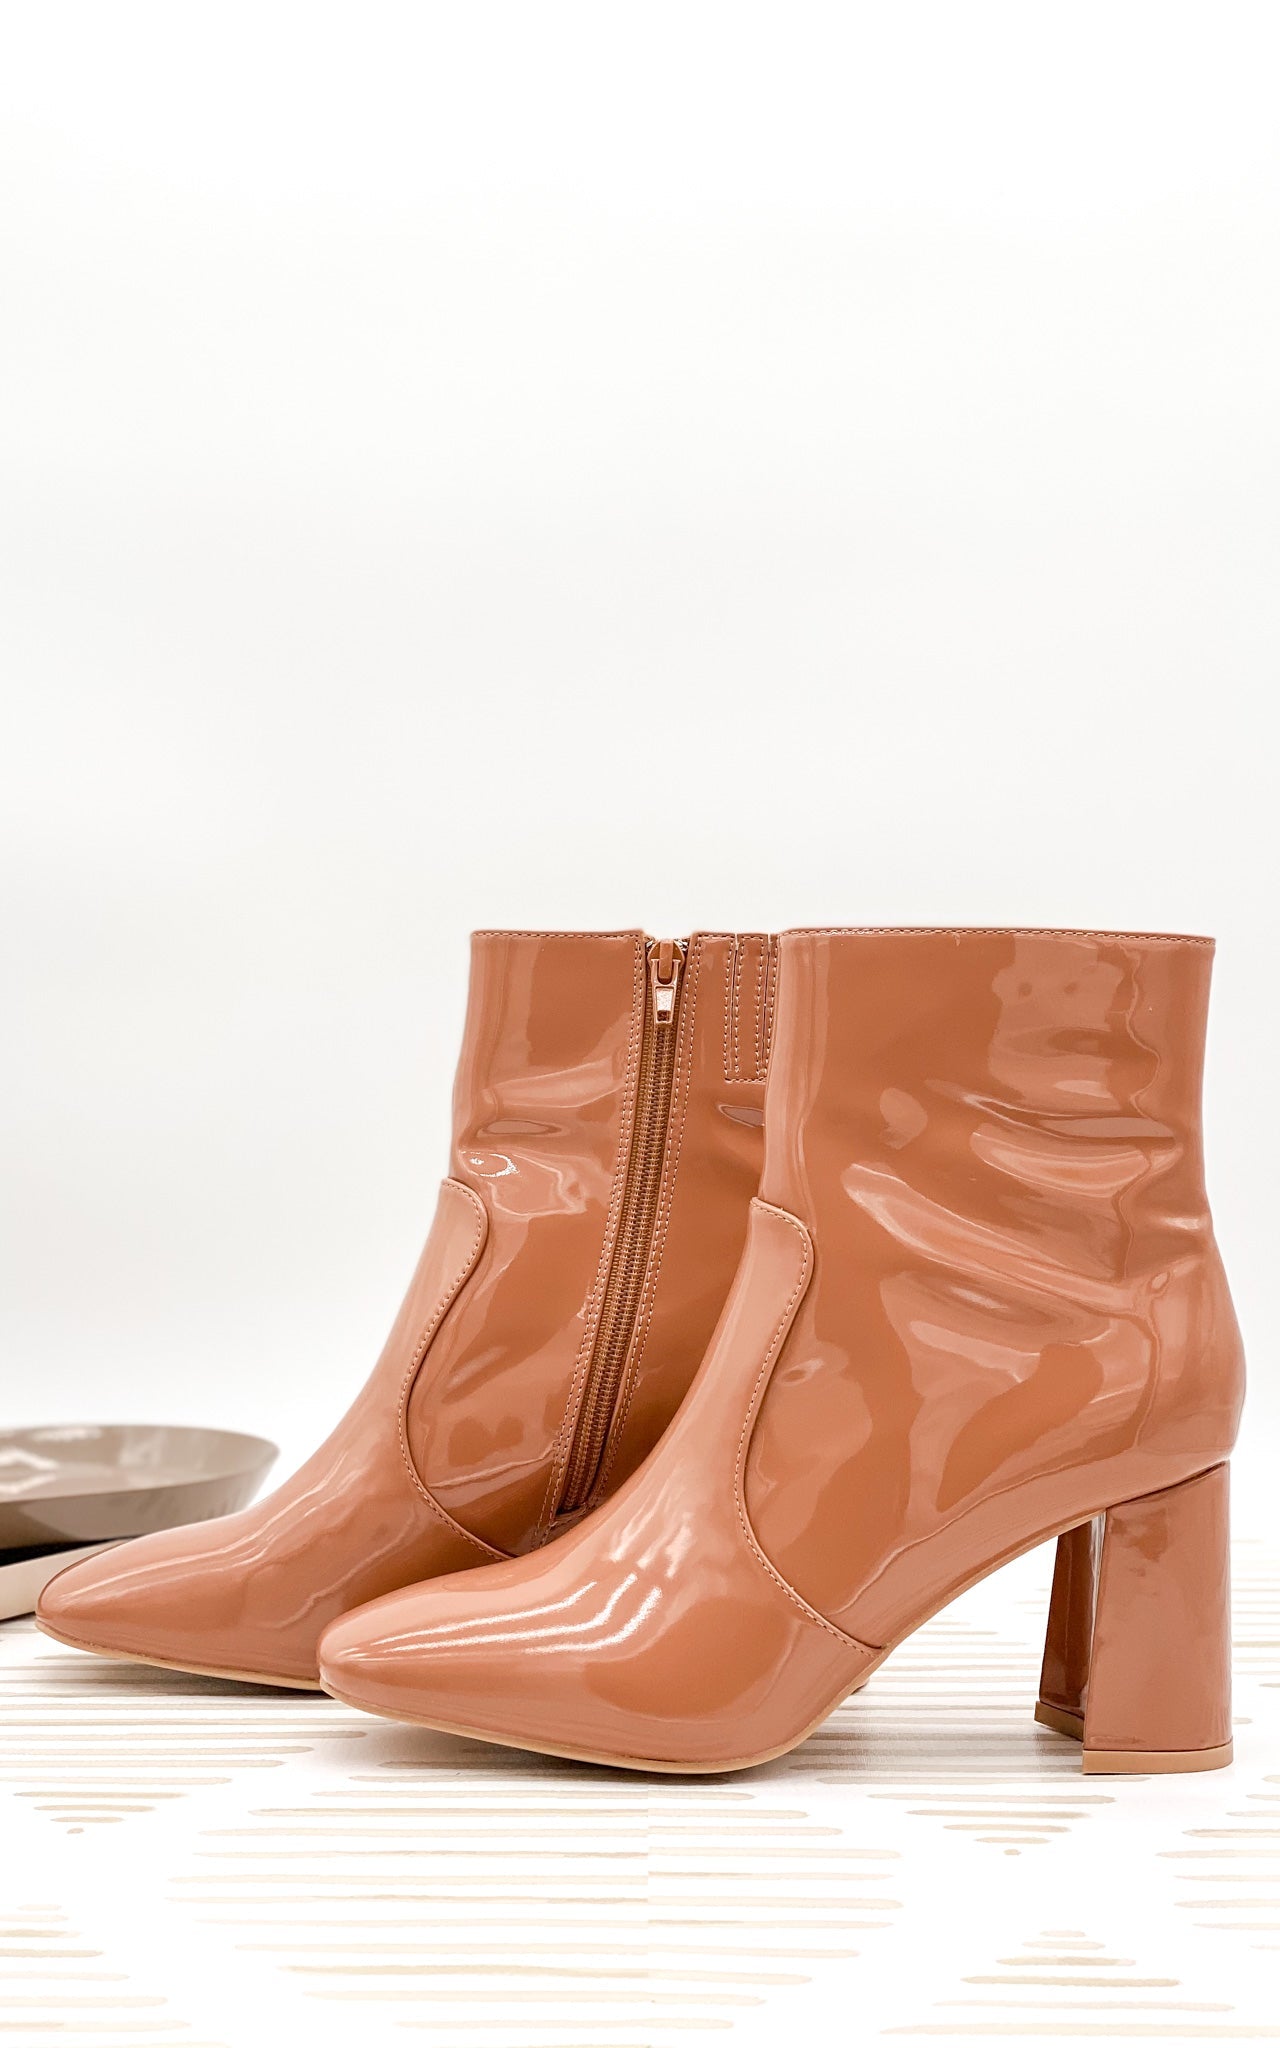 Ketsby Heeled Ankle Boot in Nude